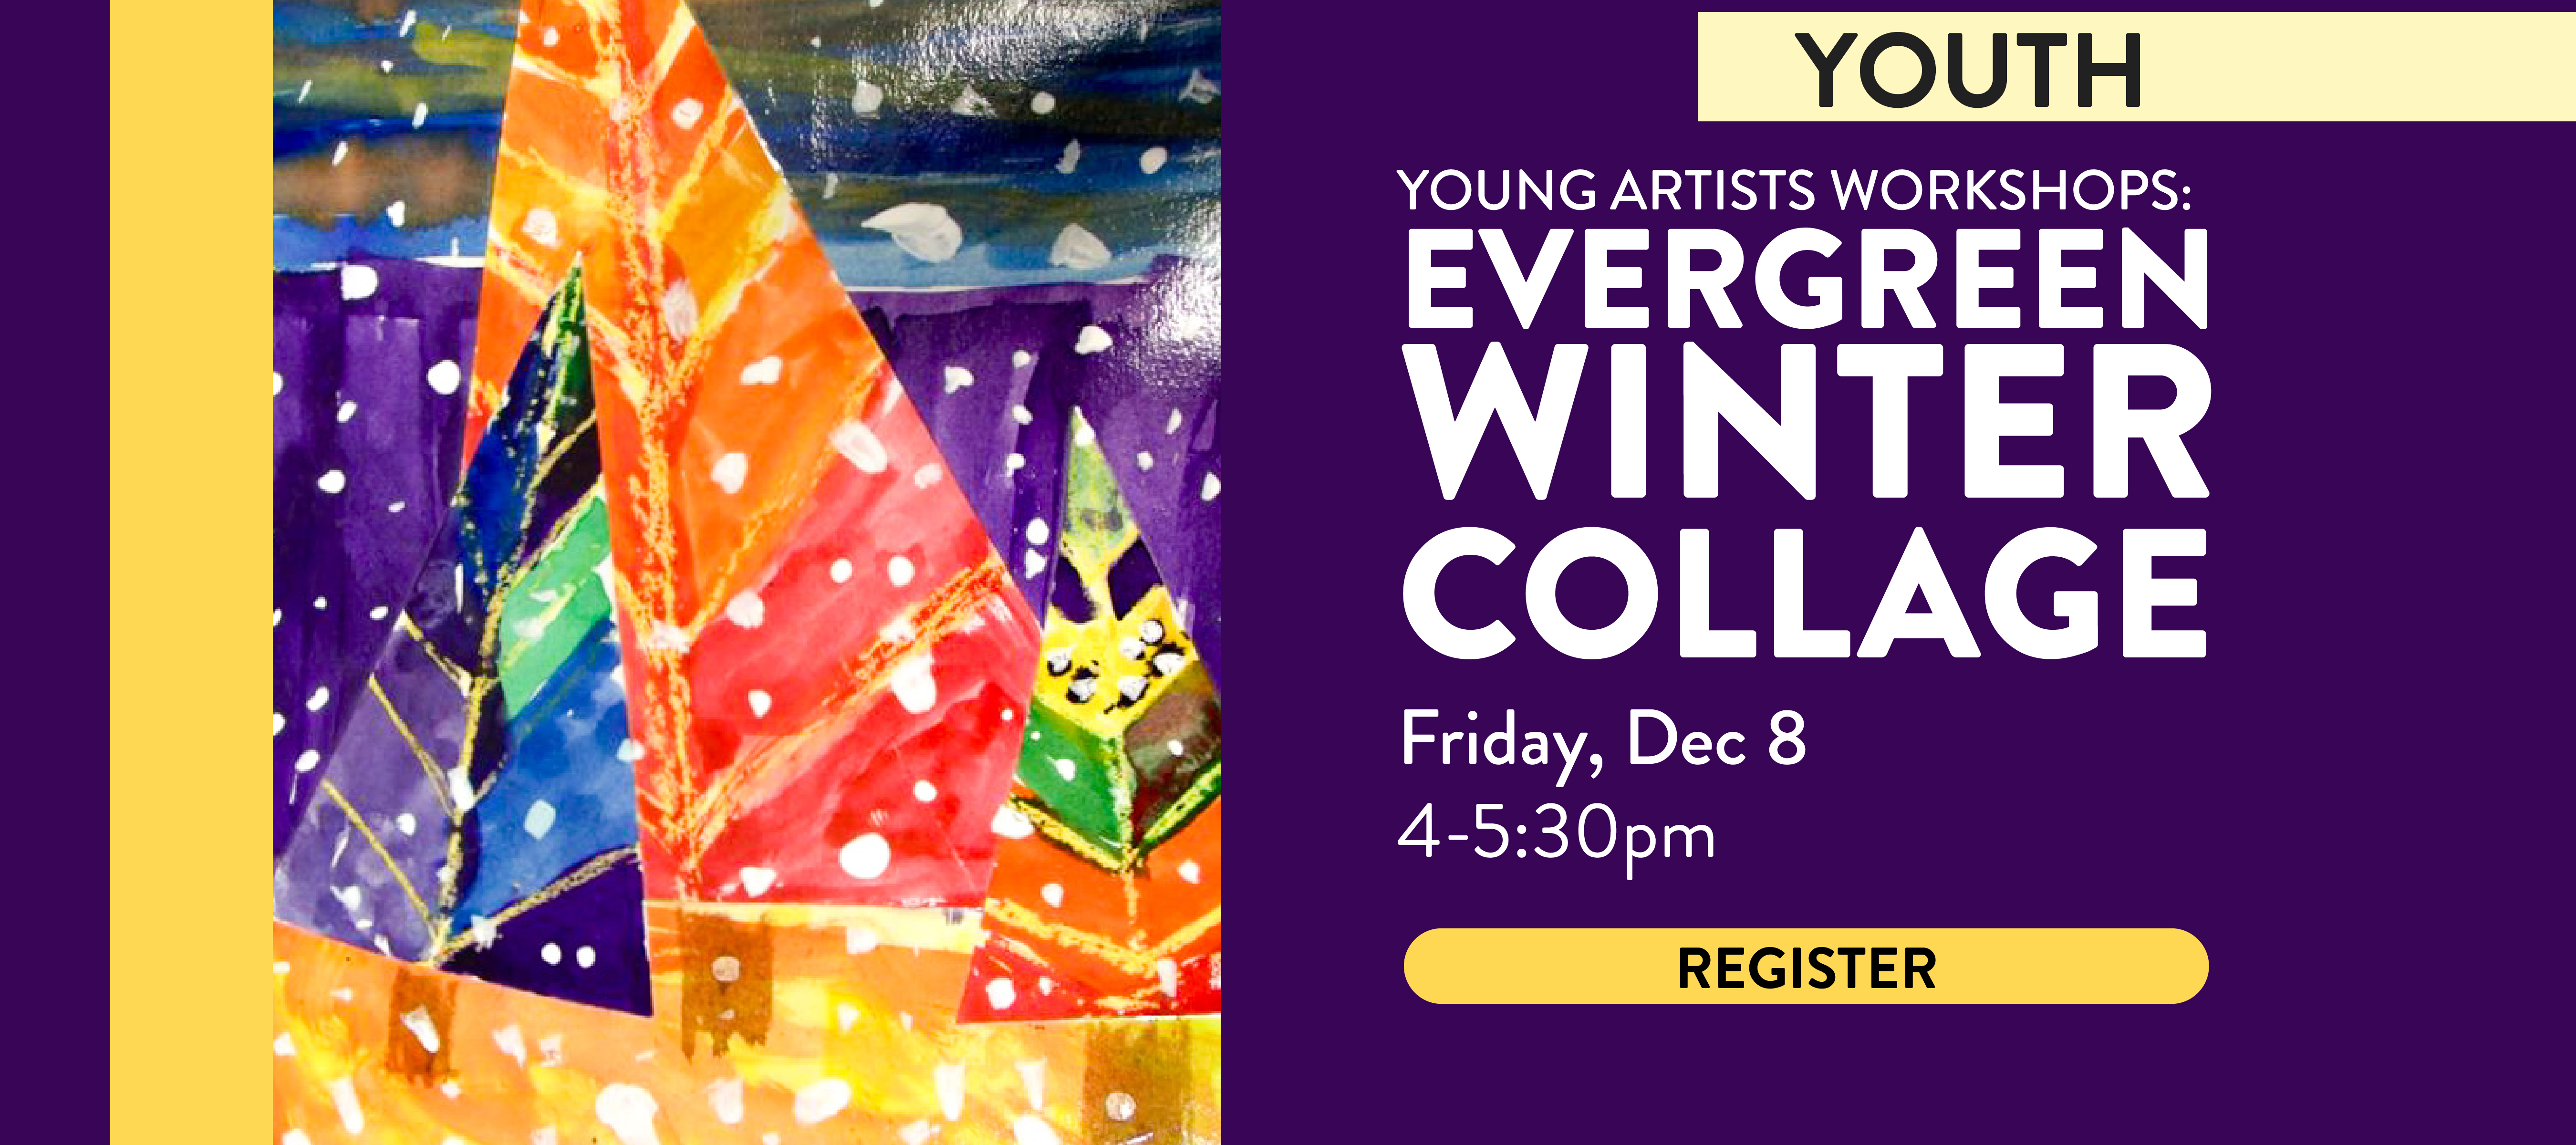 phpl, prospect heights public library, YOUNG ARTISTS WORKSHOPS: EVERGREEN WINTER COLLAGE